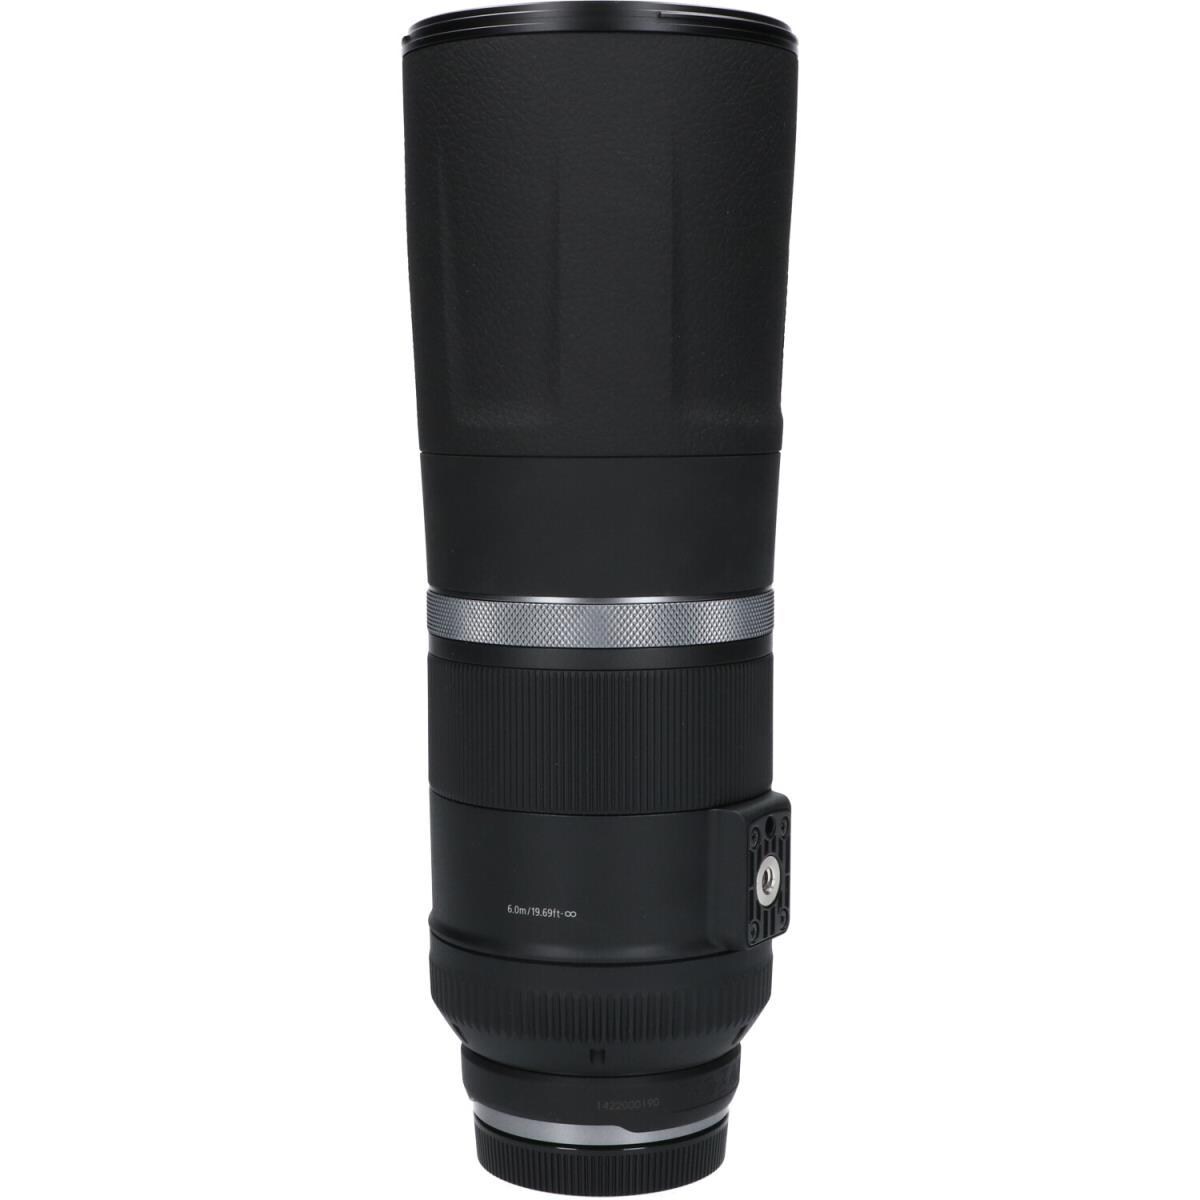 CANON RF800mm F11IS STM